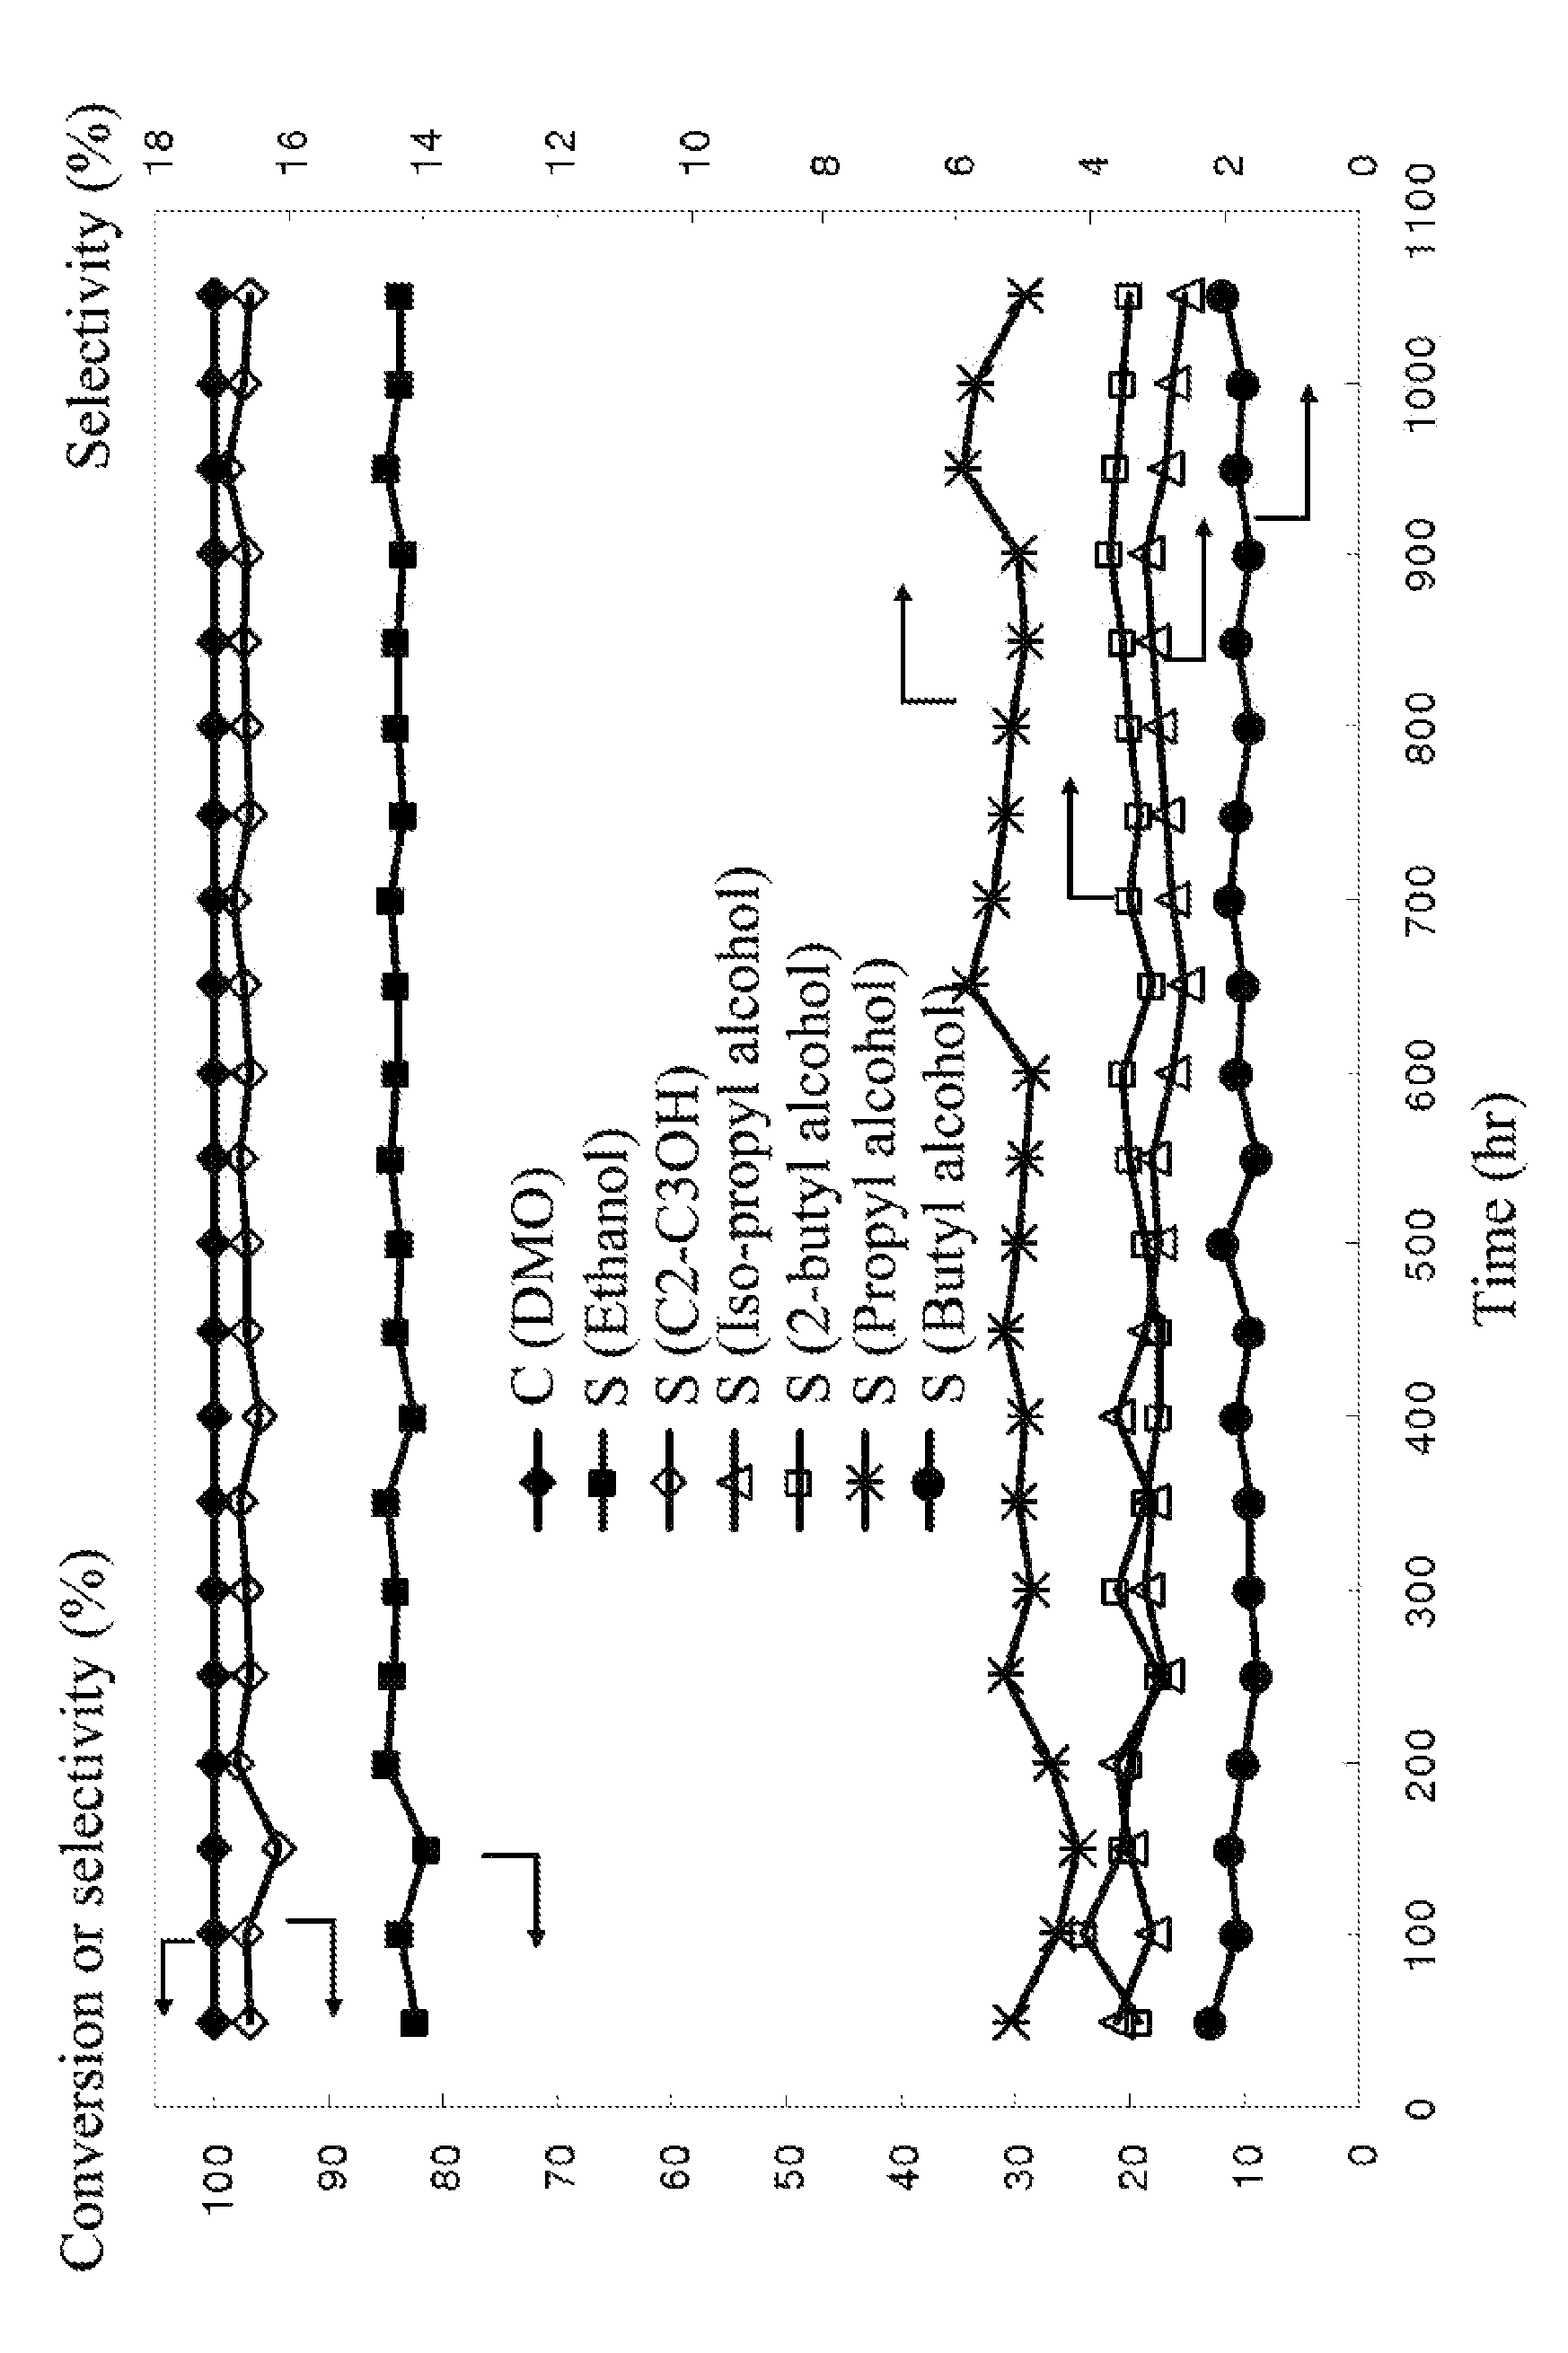 Catalyst for hydrogenation of oxalic ester to ethanol, method of preparing the catalyst, and method of using the same